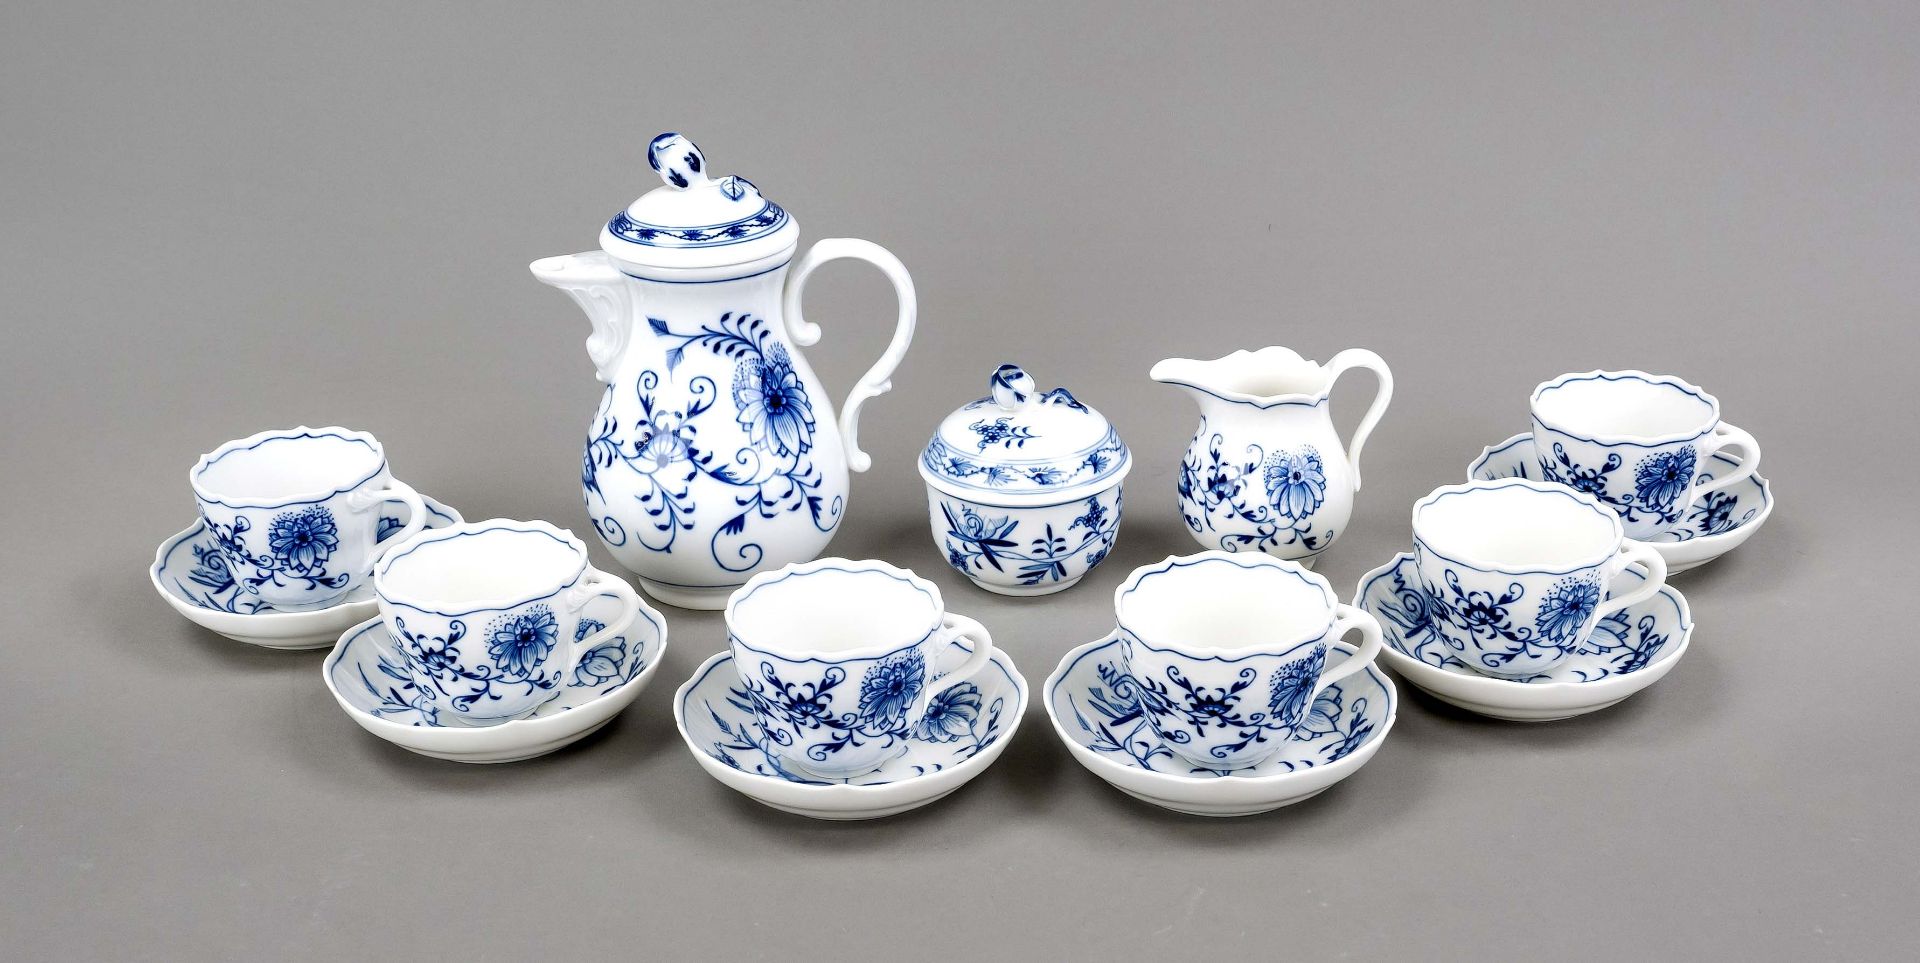 Mocha service for 6 persons, 15-piece, Meissen, marks after 1934, 1st choice, shape new cut-out,